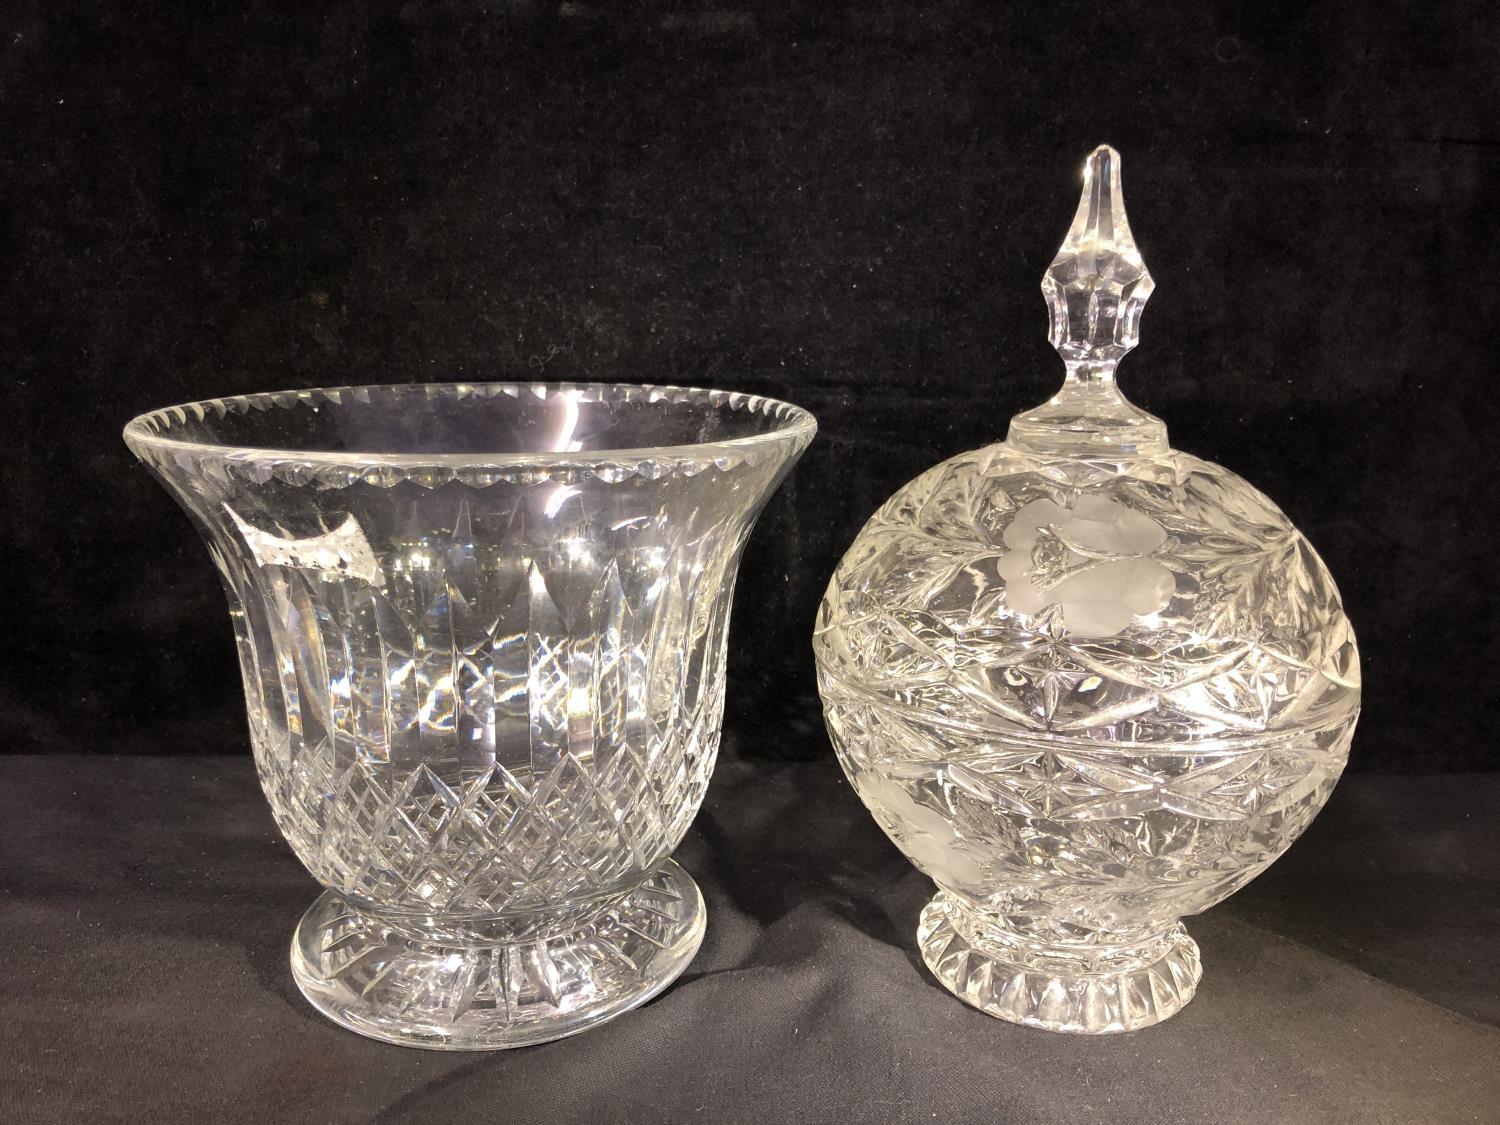 A Webb's glass bucket vase; and a globular glass box and cover with spire finial cut and acid